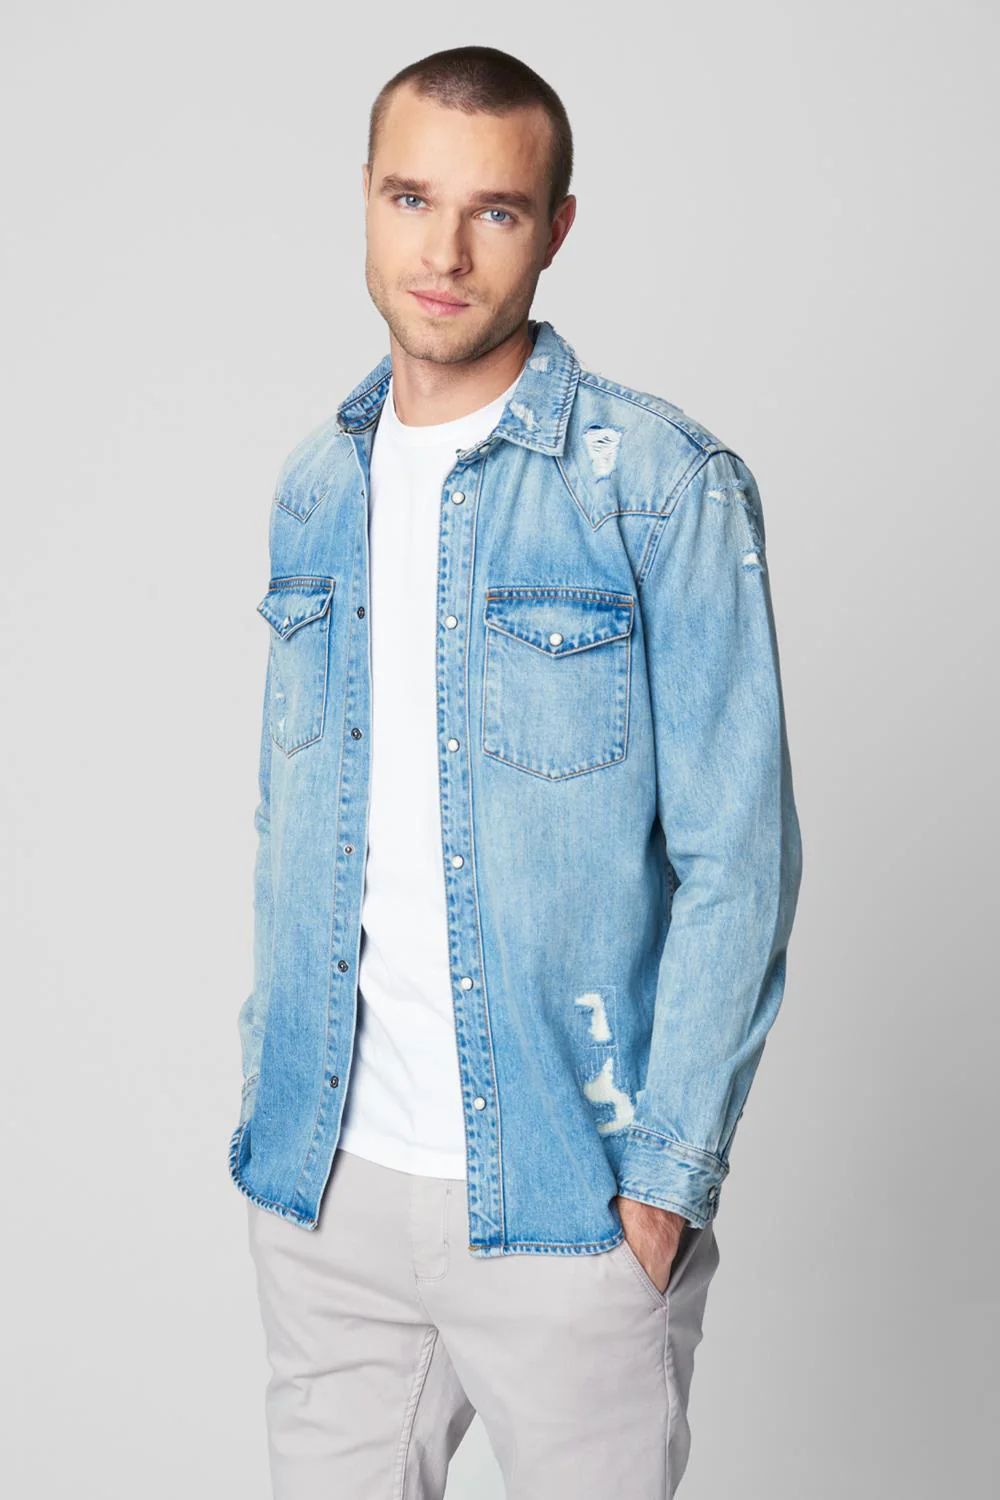 Blank NYC Men's Ranger Denim Shirt in Blue Small Lord & Taylor | Lord & Taylor